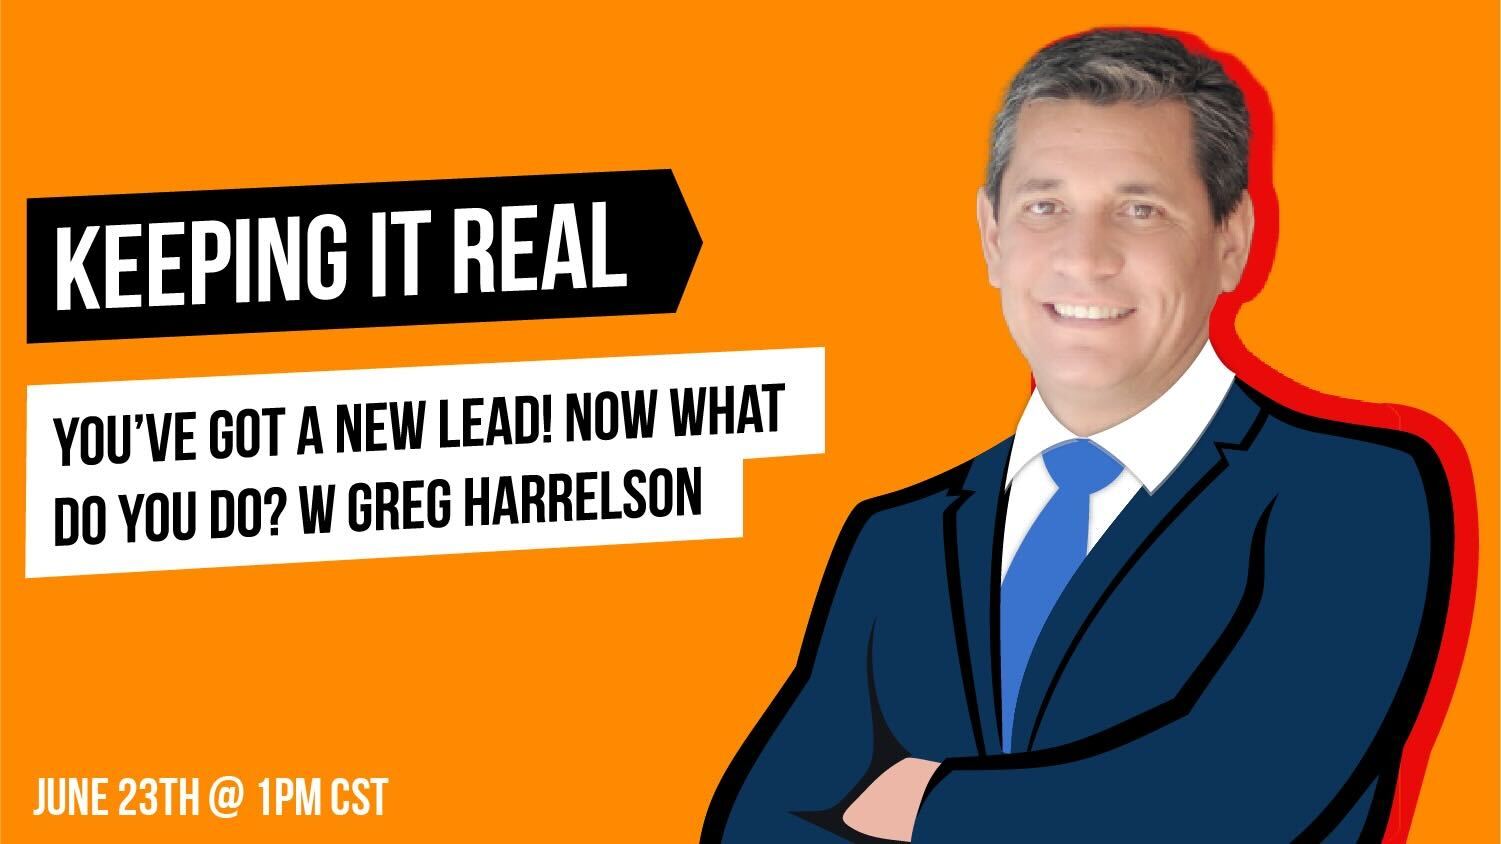 Keeping It Real: You’ve got a new lead! Now what do you do? w/ Greg Harrelson